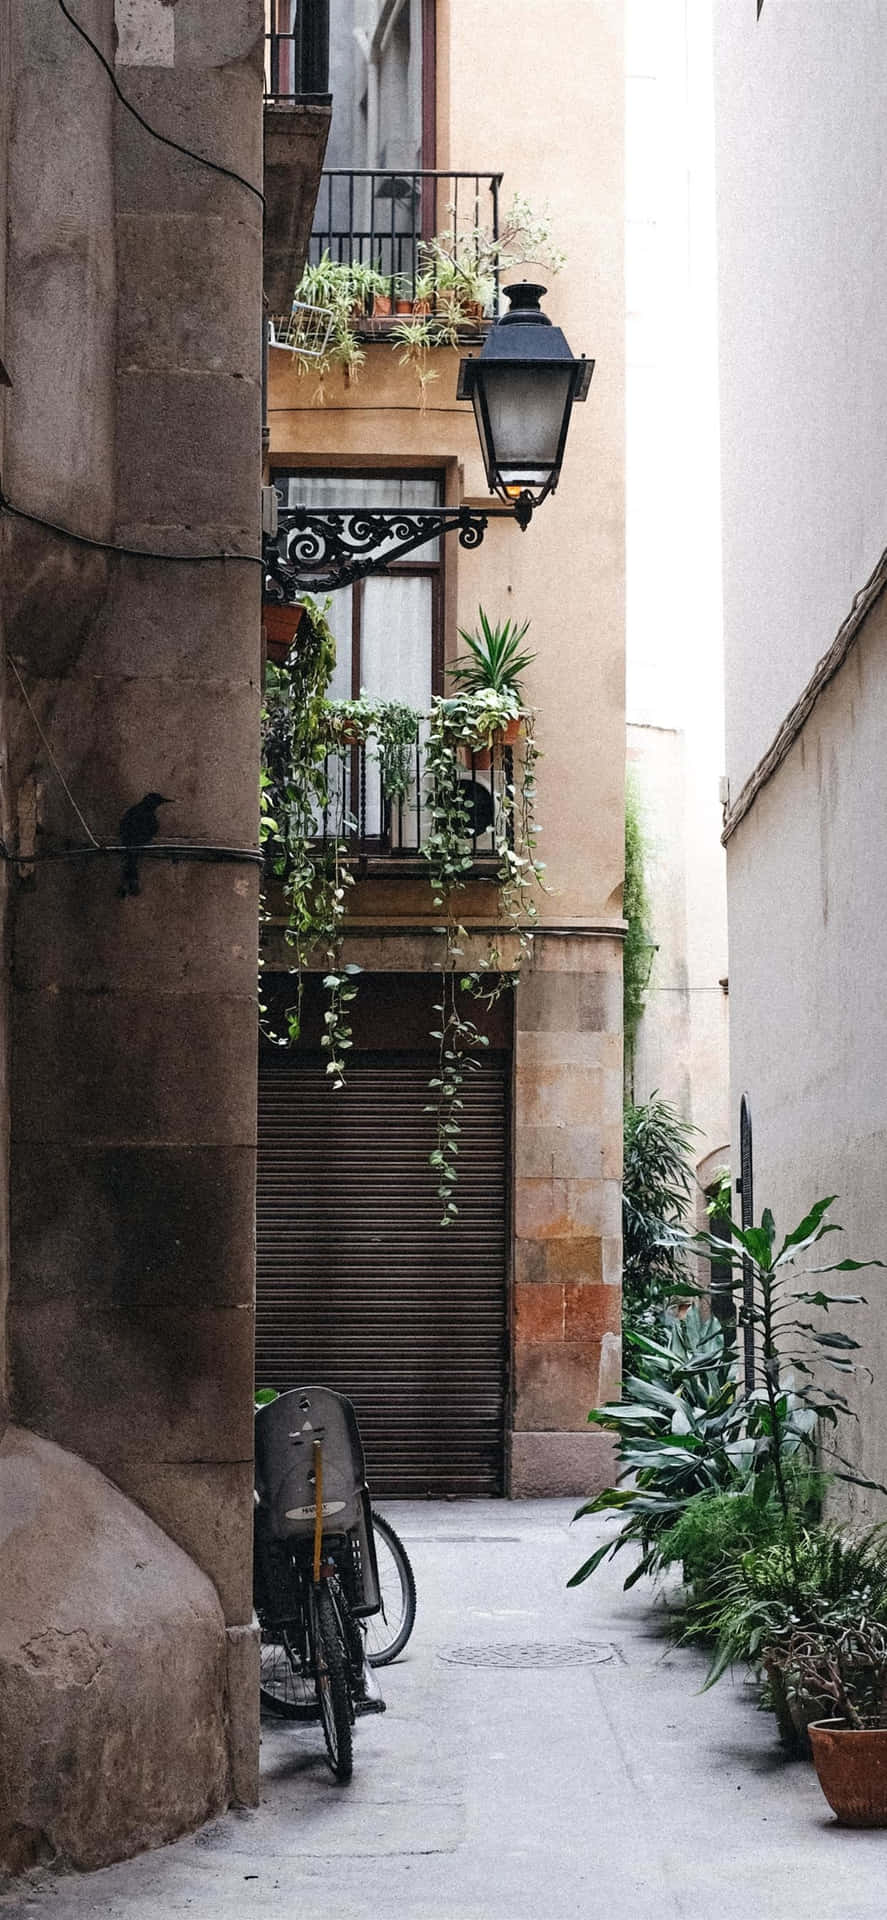 traditional spanish architecture